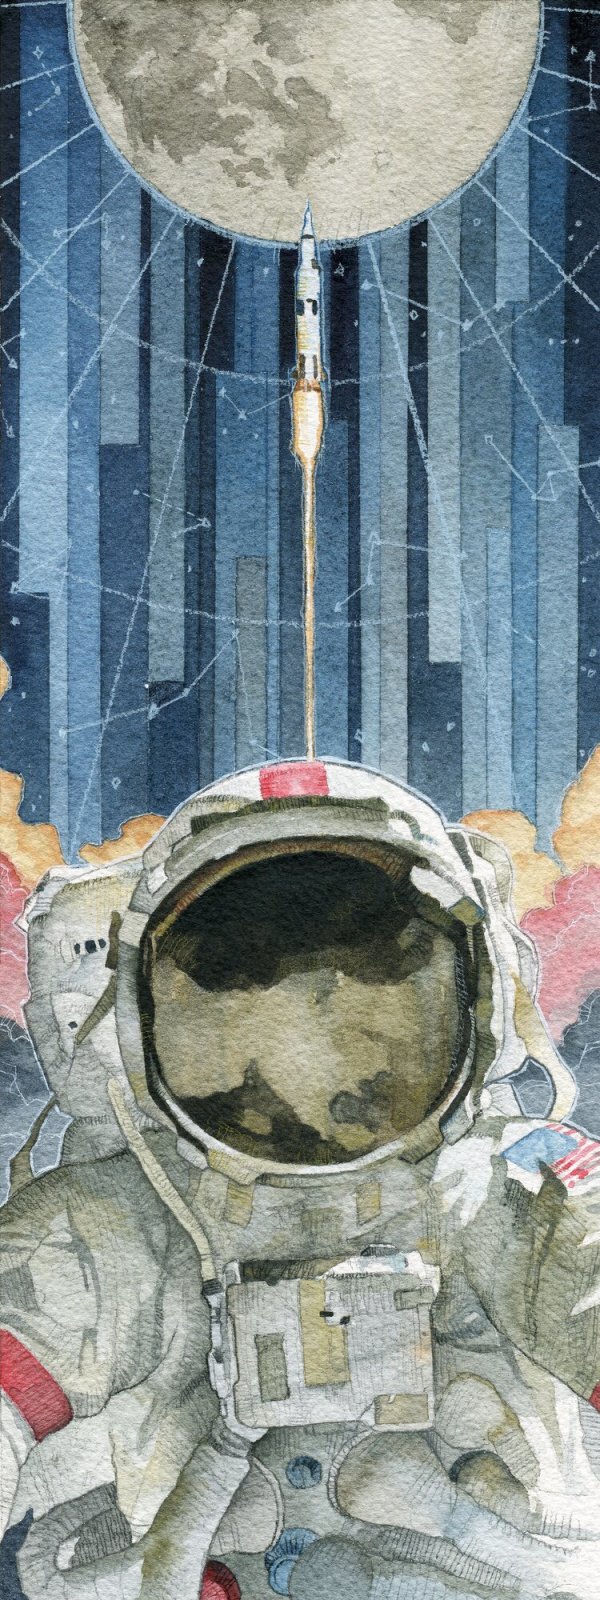 Spaceman by Rob Hough by Derek Gores Gallery